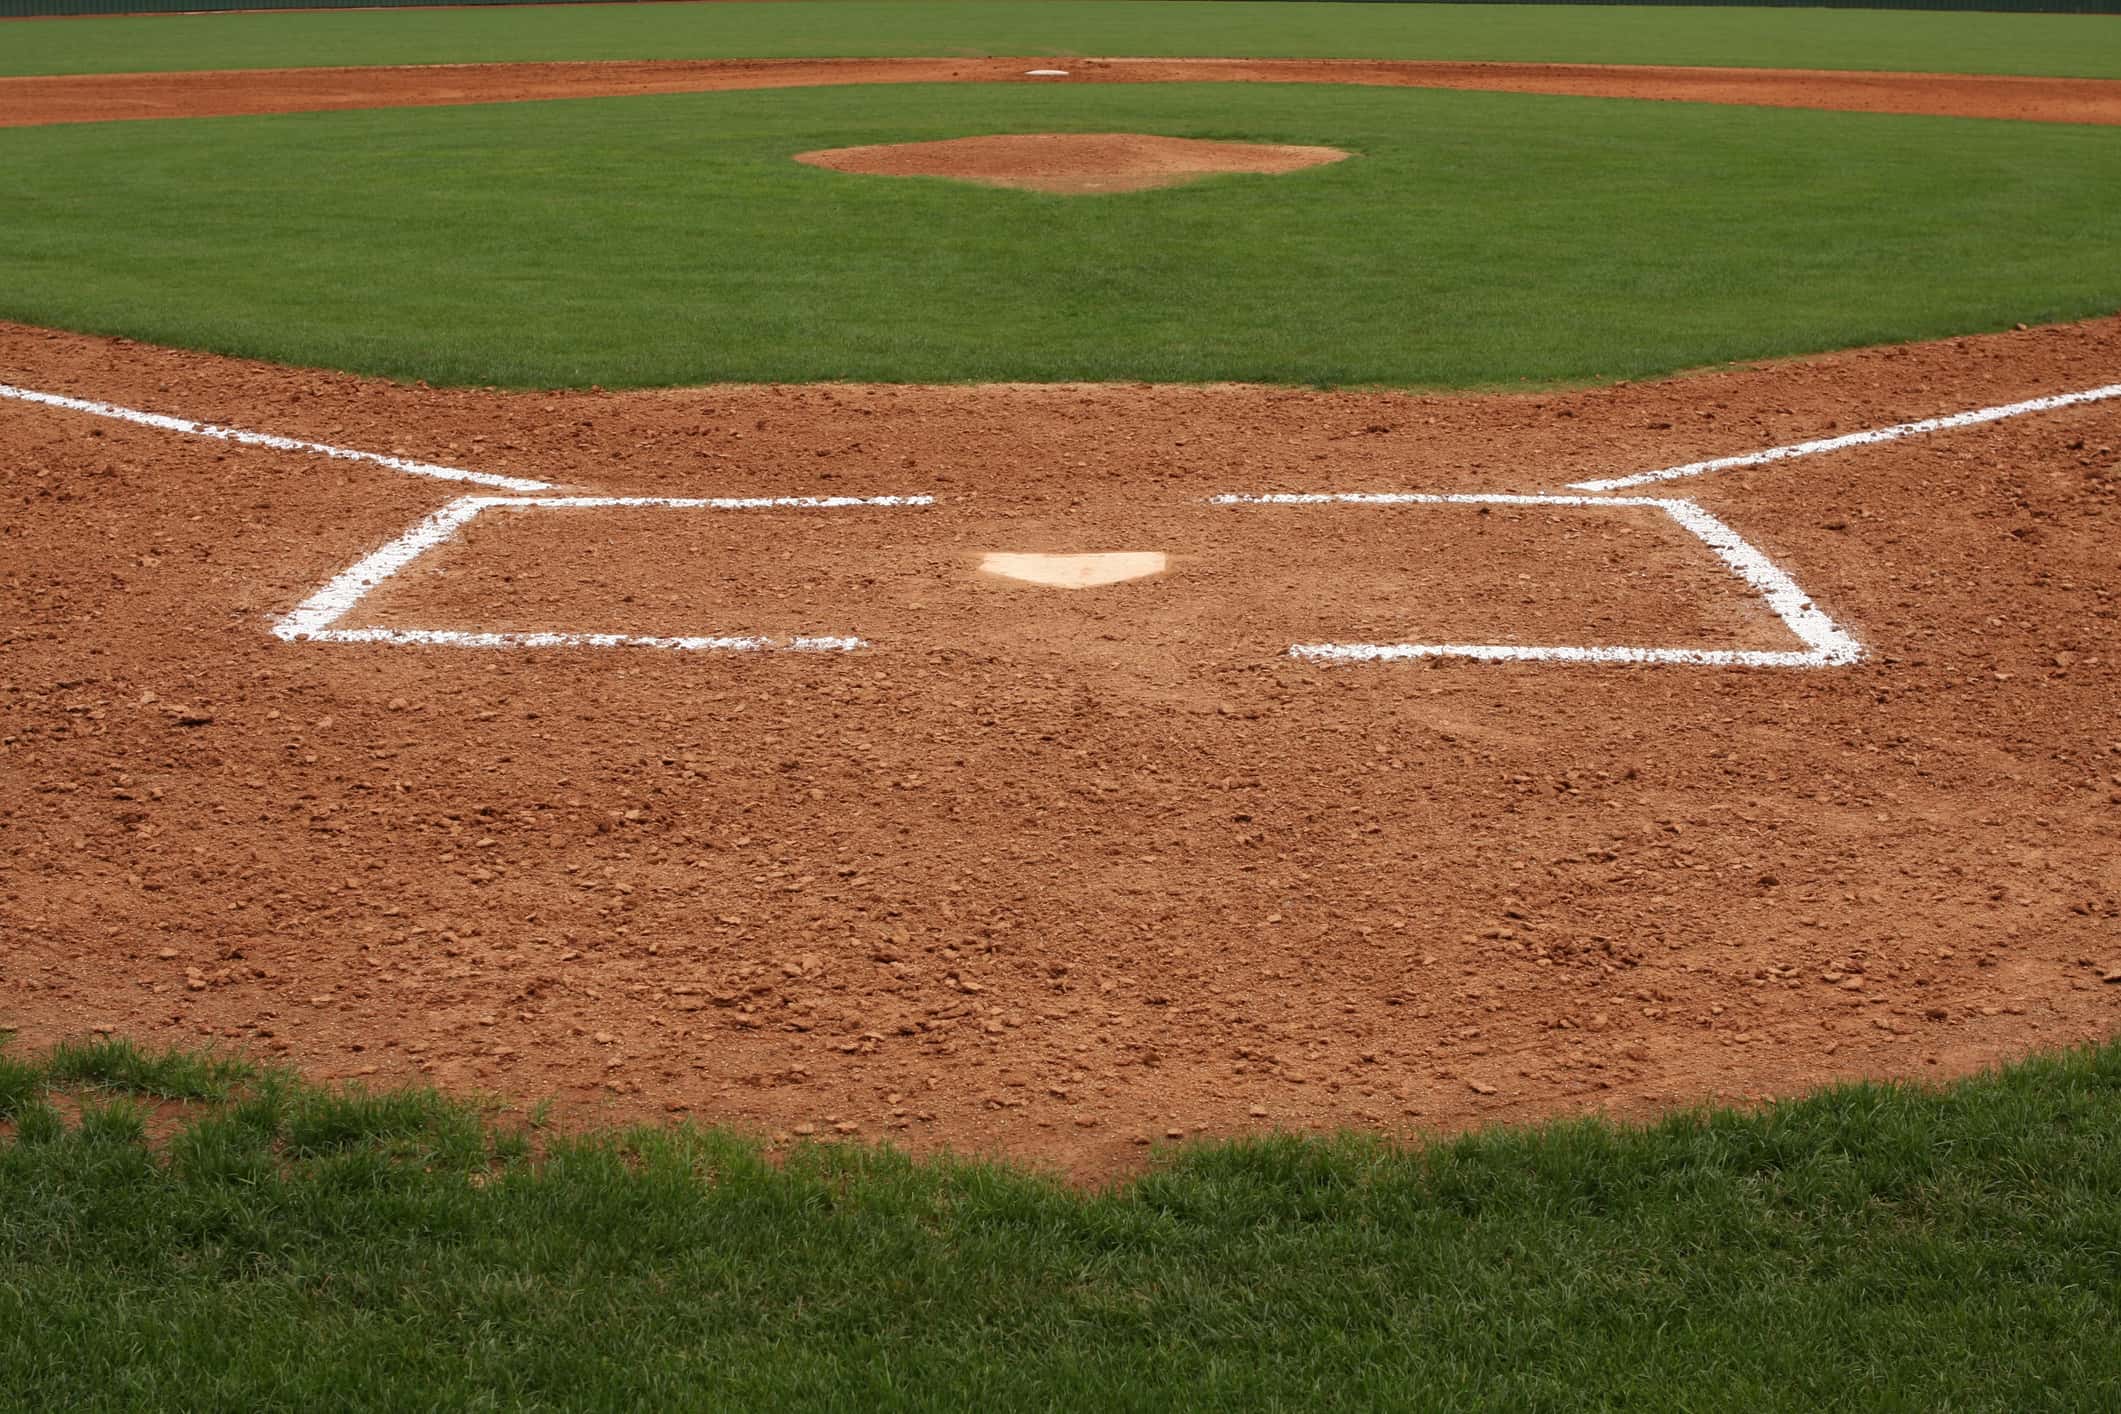 Home Plate and Infield of a Baseball Field